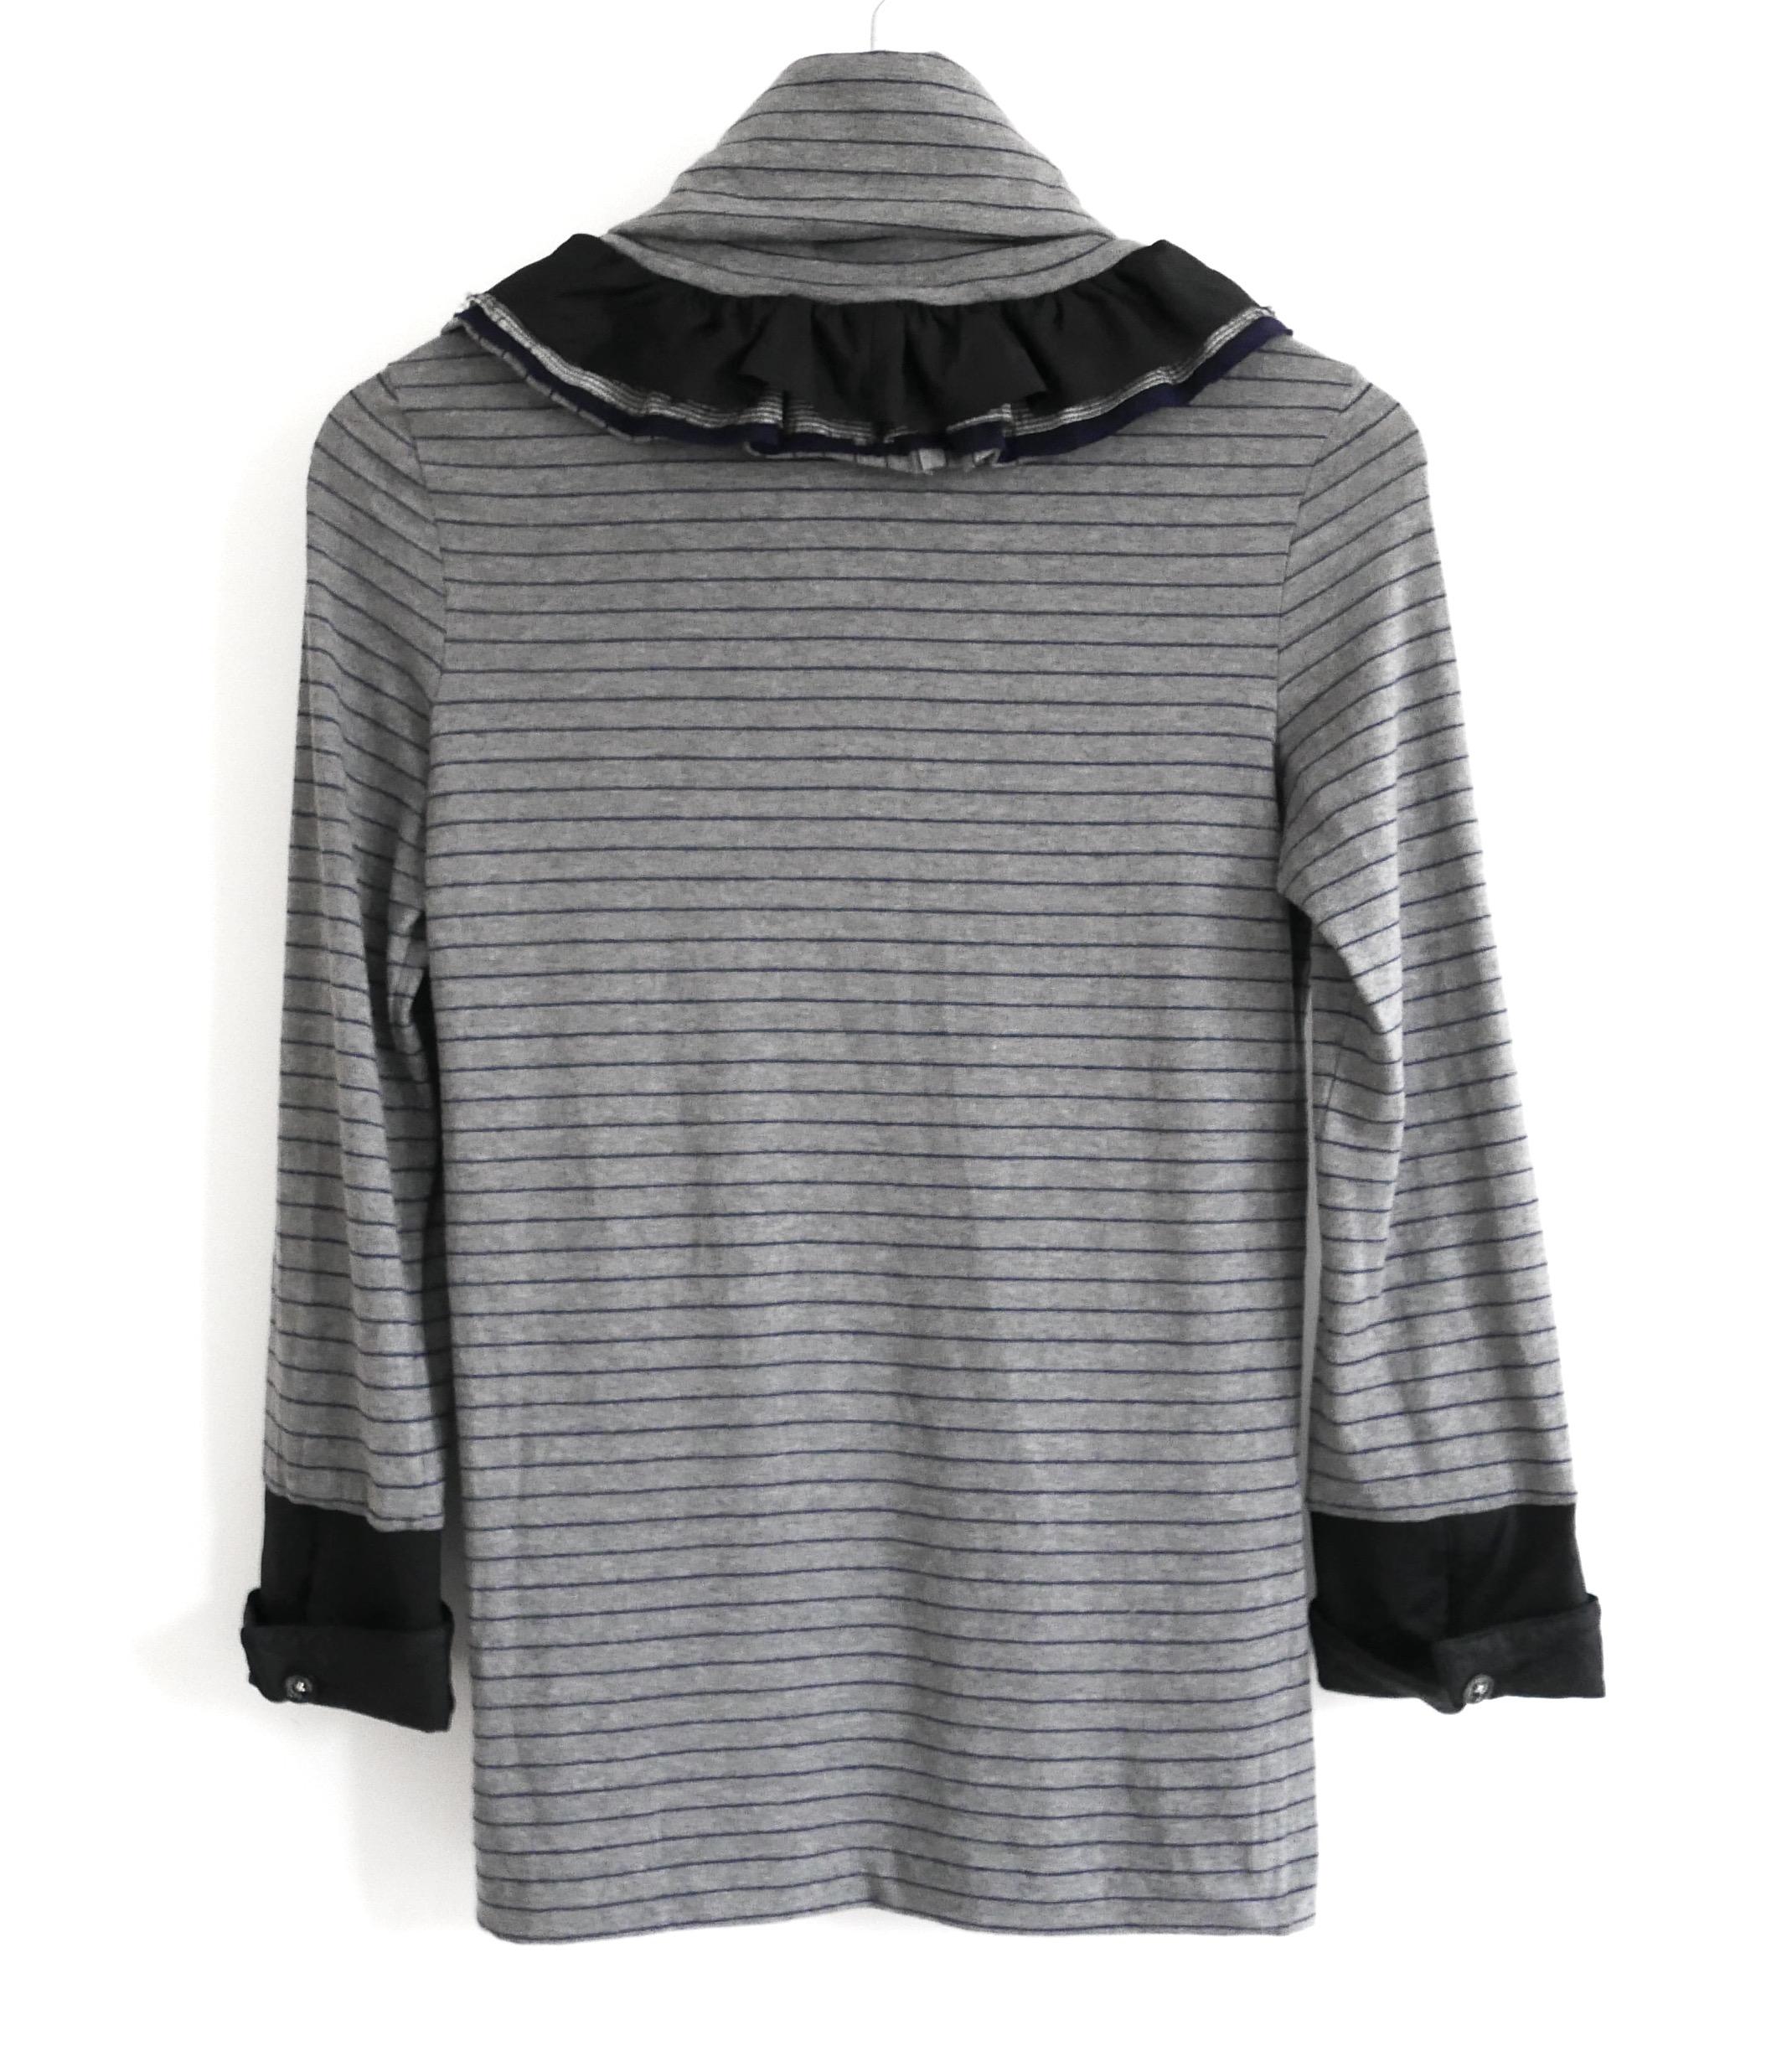 Chanel Fall 2008 Ruffle Frilled Neck Striped Jersey Top In Excellent Condition For Sale In London, GB